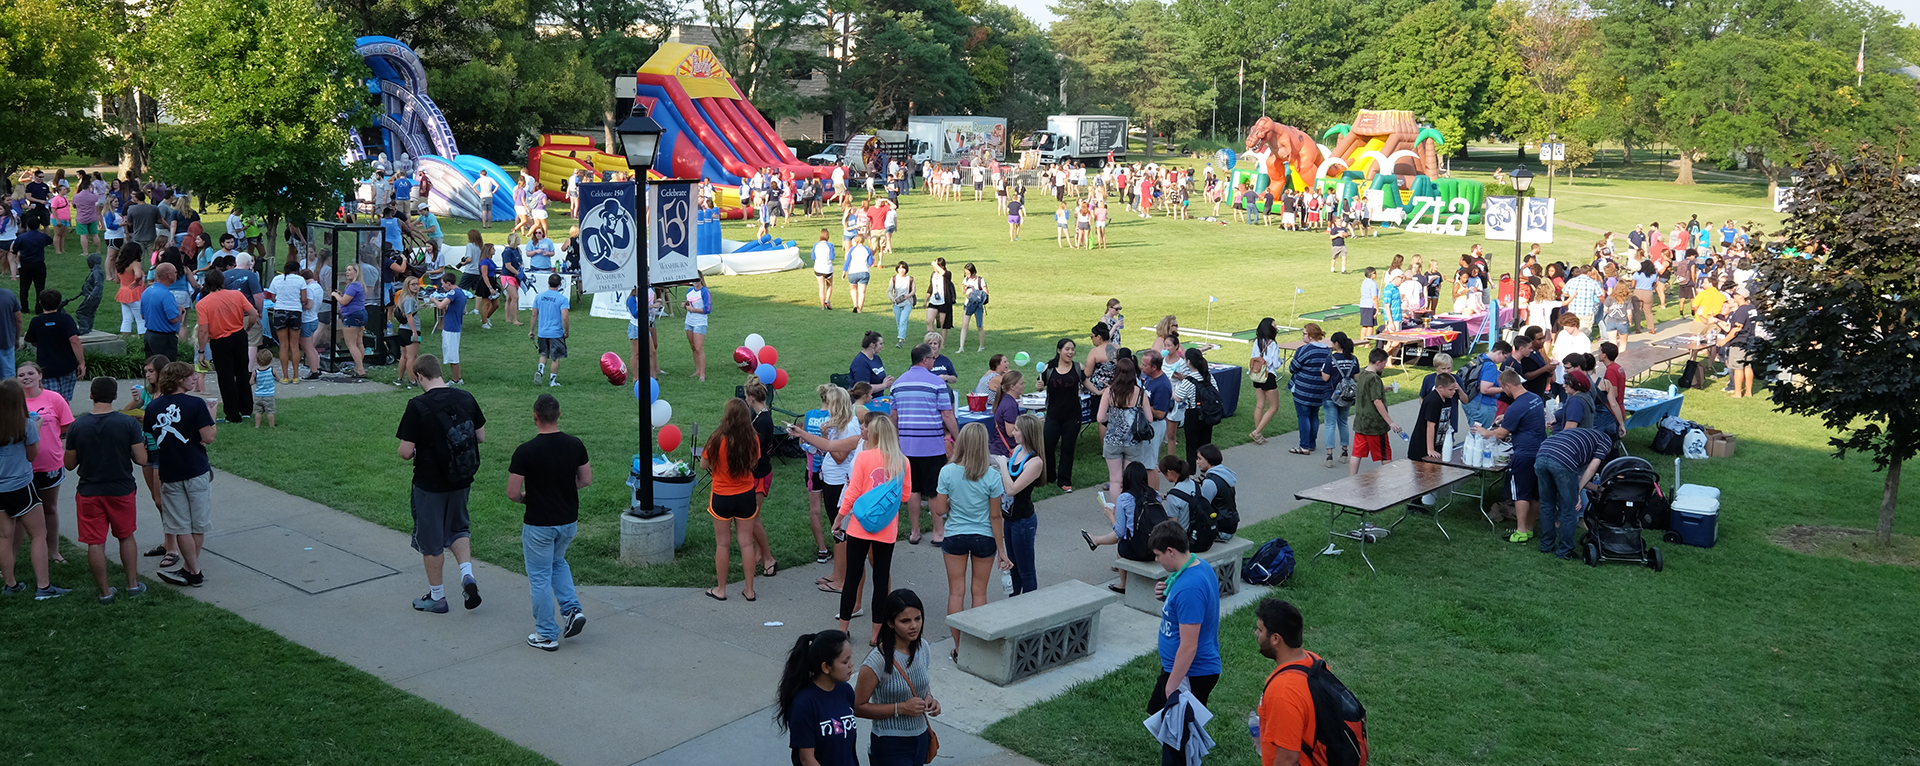 Washburn students participate in several activities during Welcome Week.